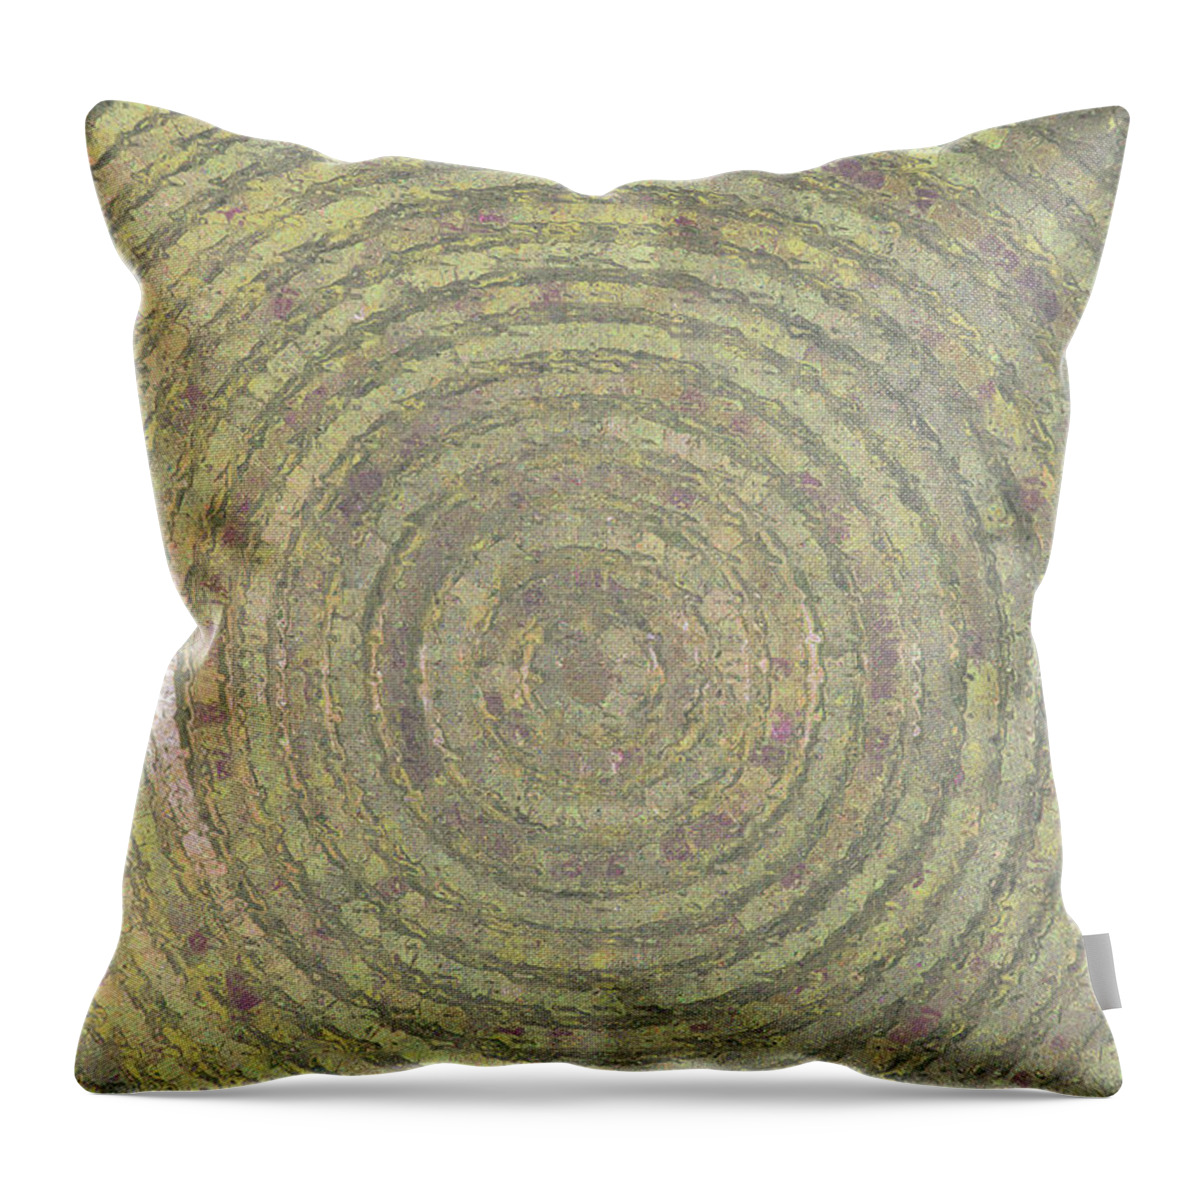 Bronze Metallic Abstract Throw Pillow featuring the digital art Bronze Gold Ripples by Pamela Smale Williams